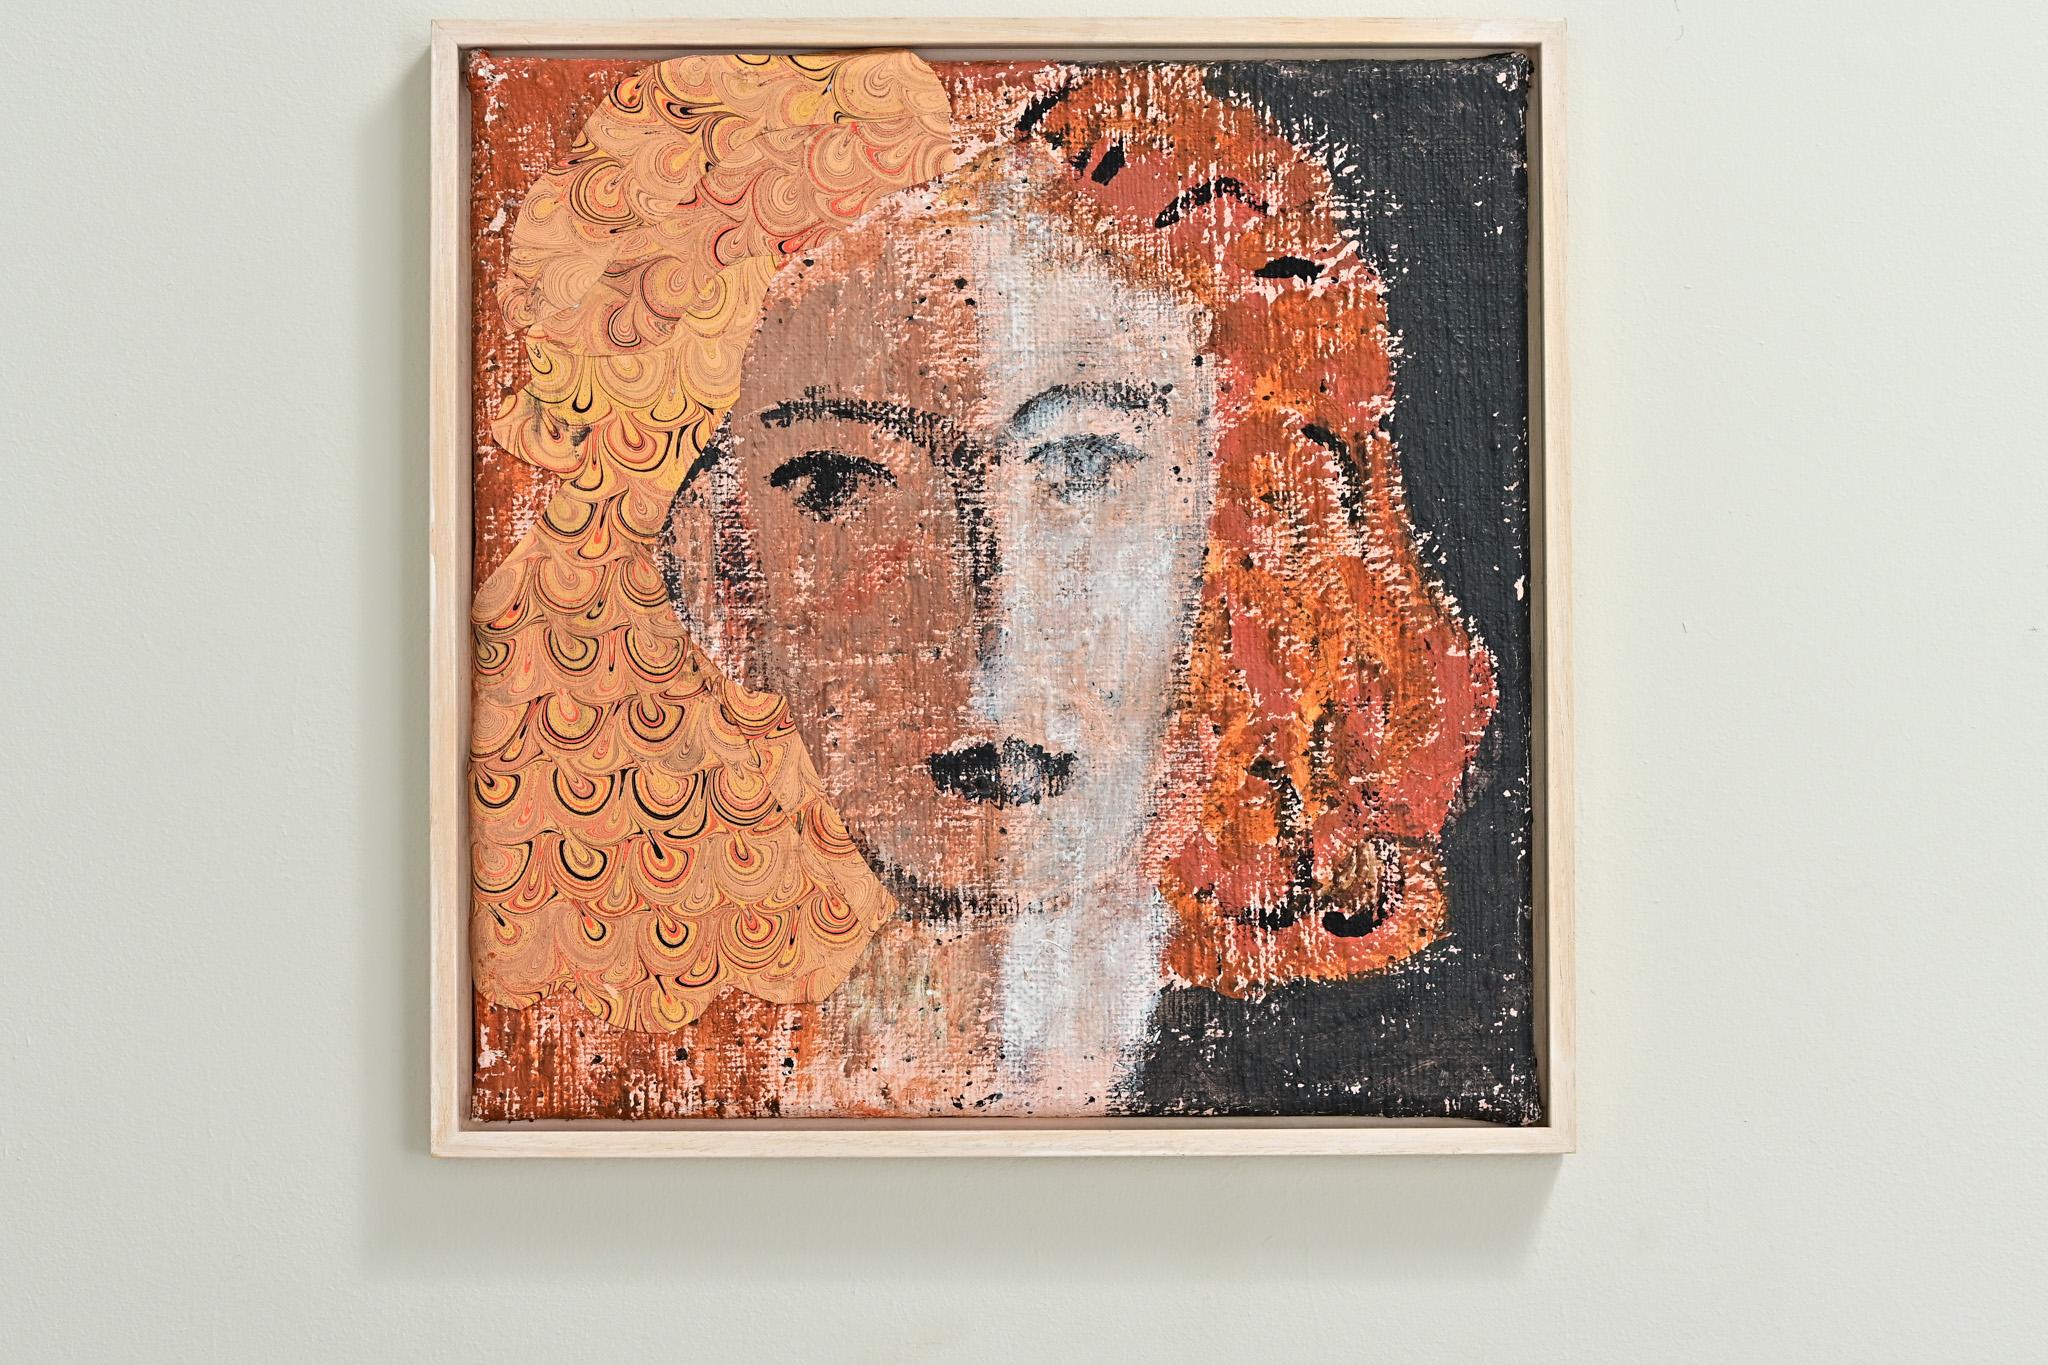 A recently made painting of a lady by an unknown Dutch artist. The mixed media collection of materials on canvas depicts a lady's face and is framed in a simple wood frame. Be sure to view the detailed images.